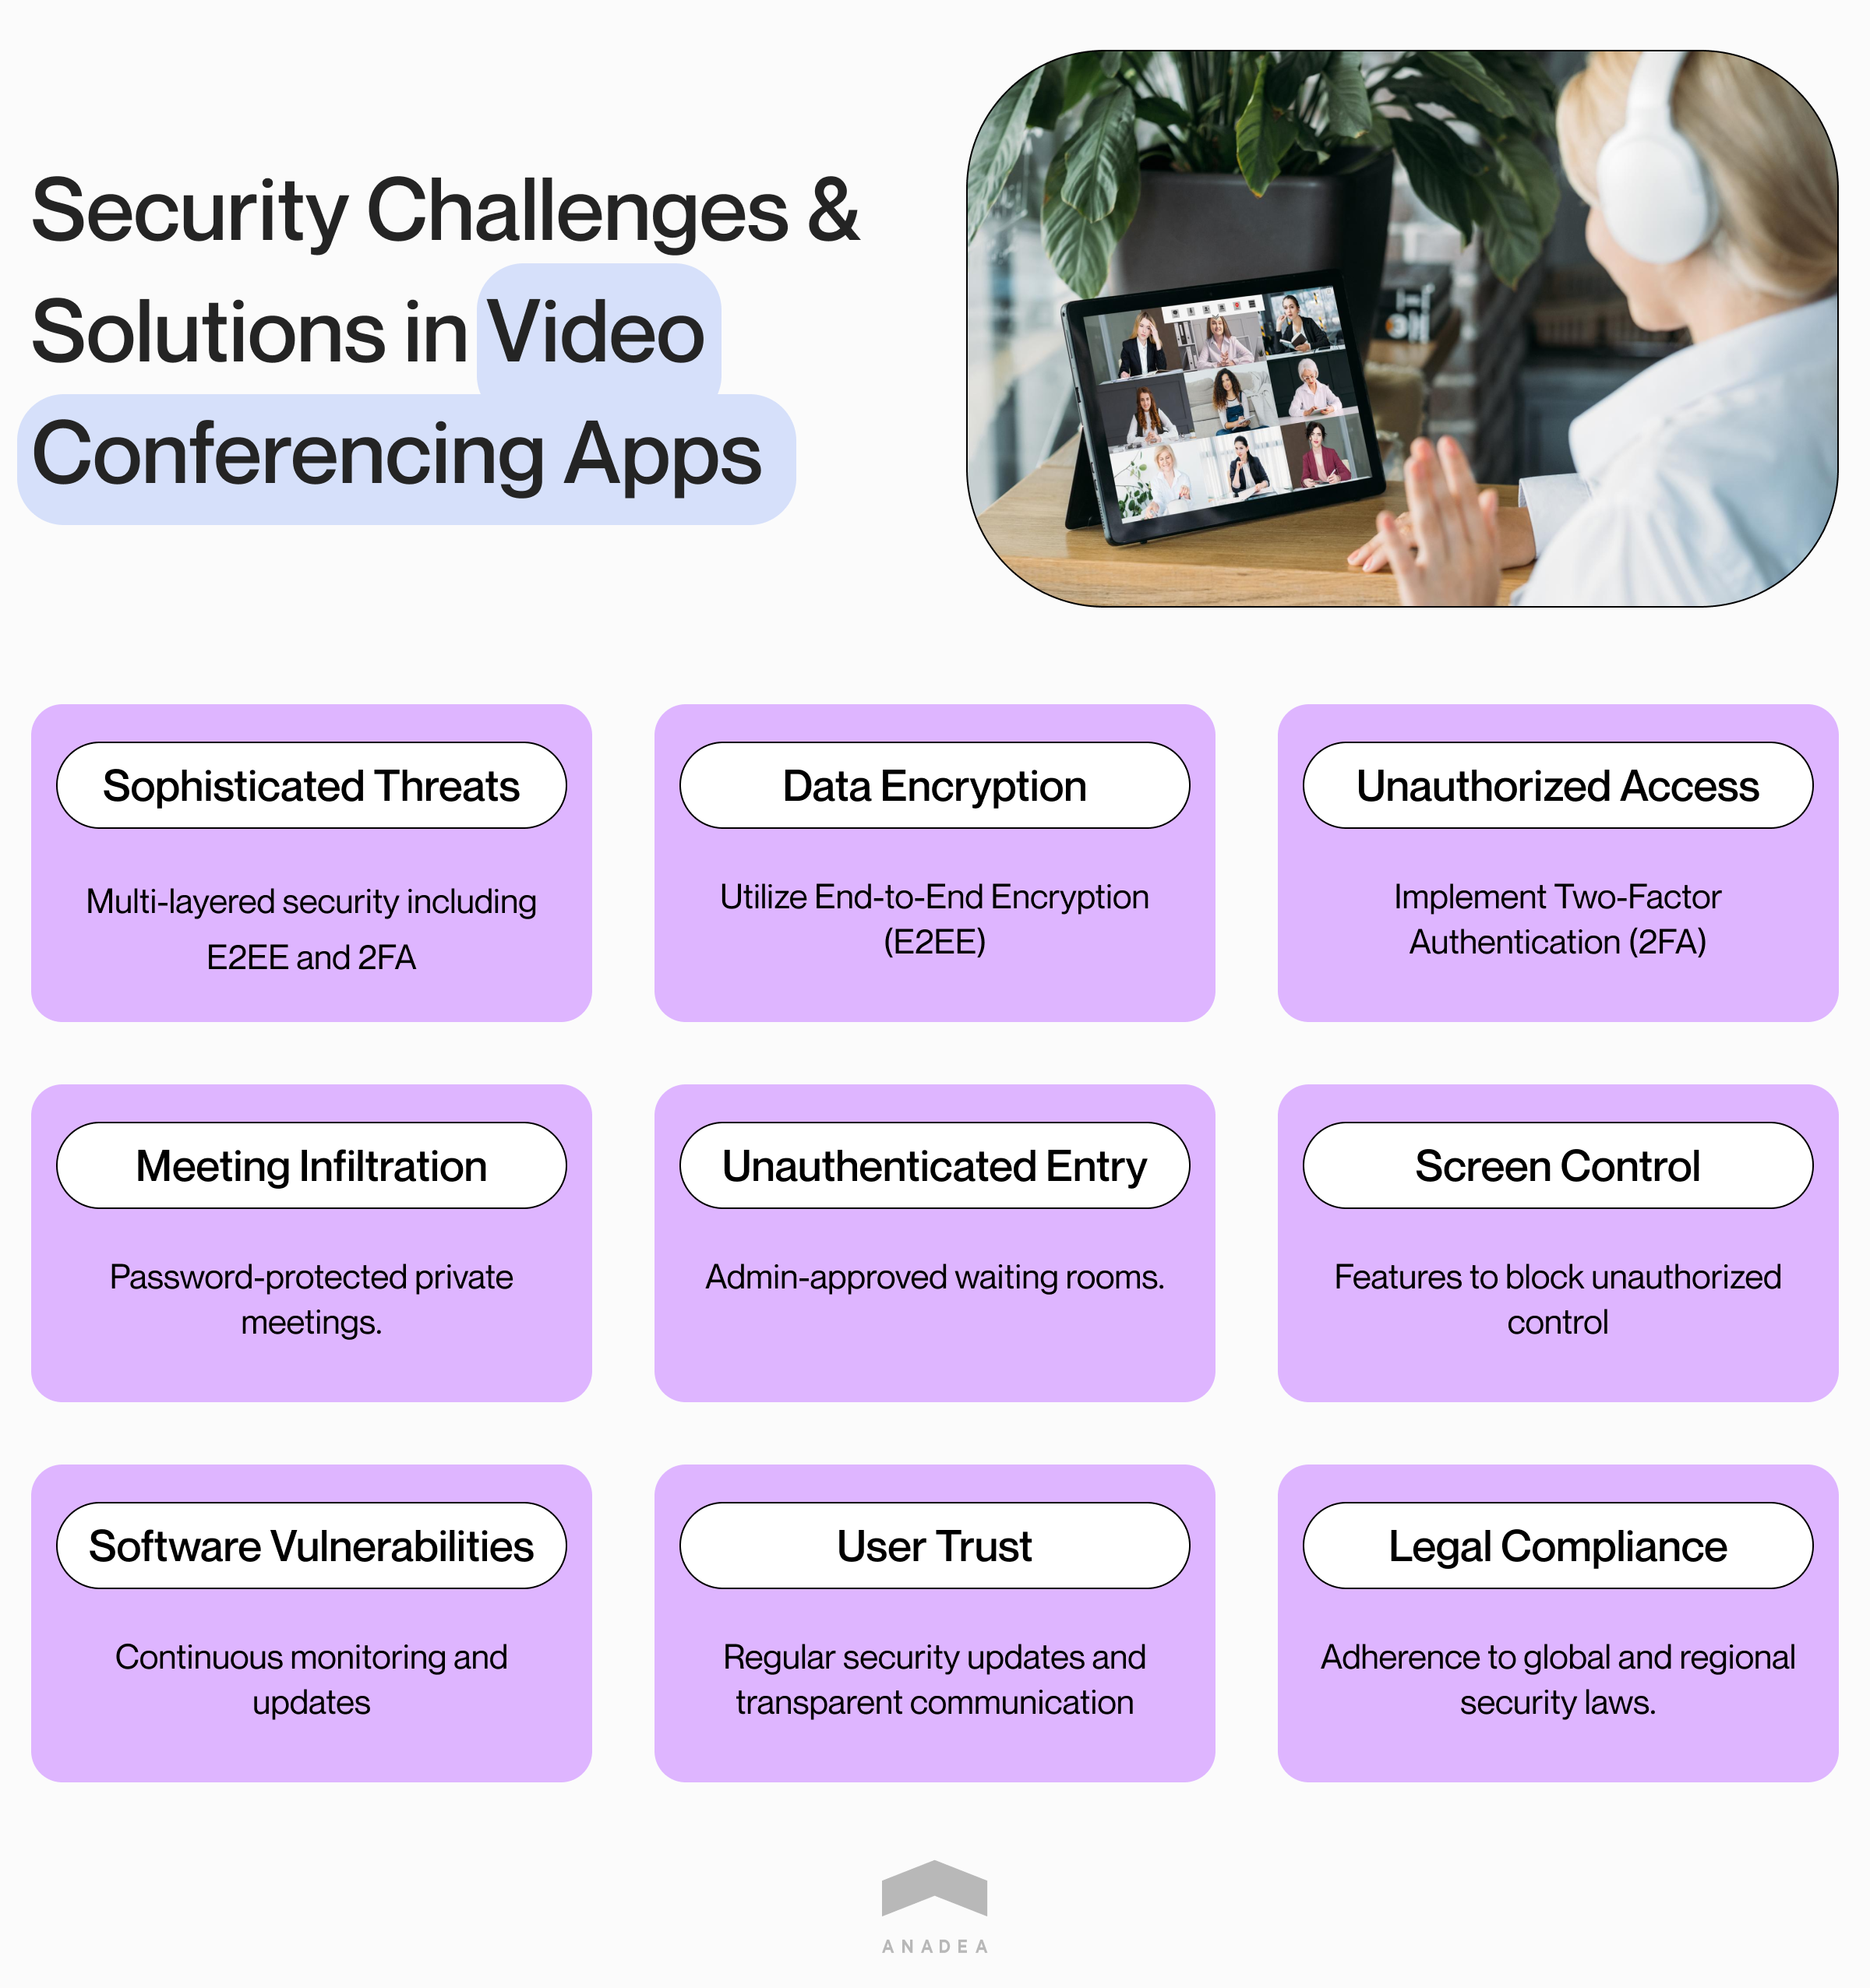 Security concerns of video chat apps